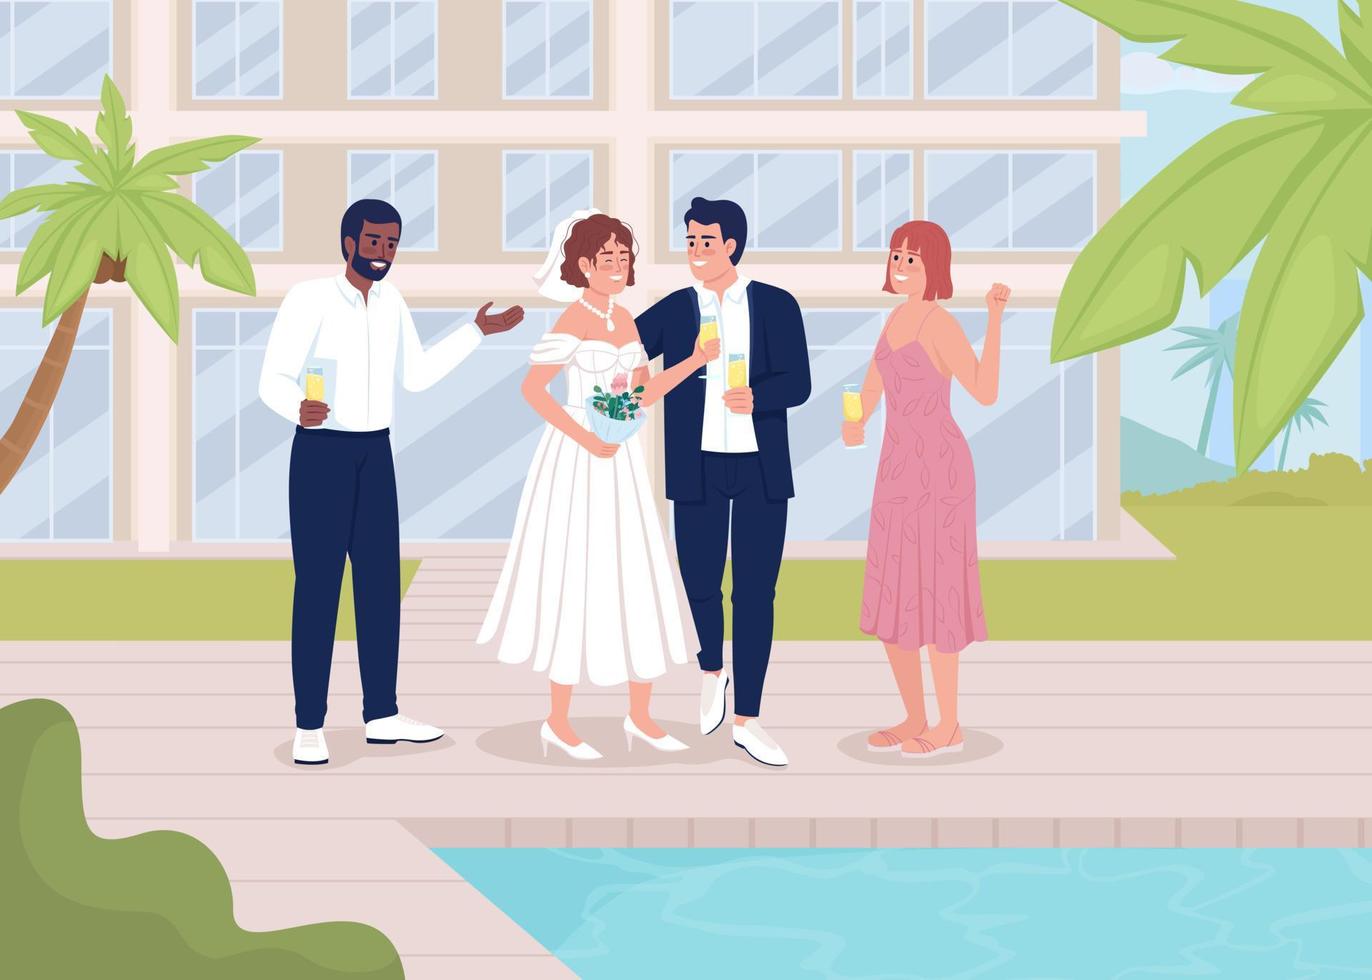 Wedding party near swimming pool flat color vector illustration. Happy event at tropical resort. Fully editable 2D simple cartoon characters with fancy building and palm trees on background